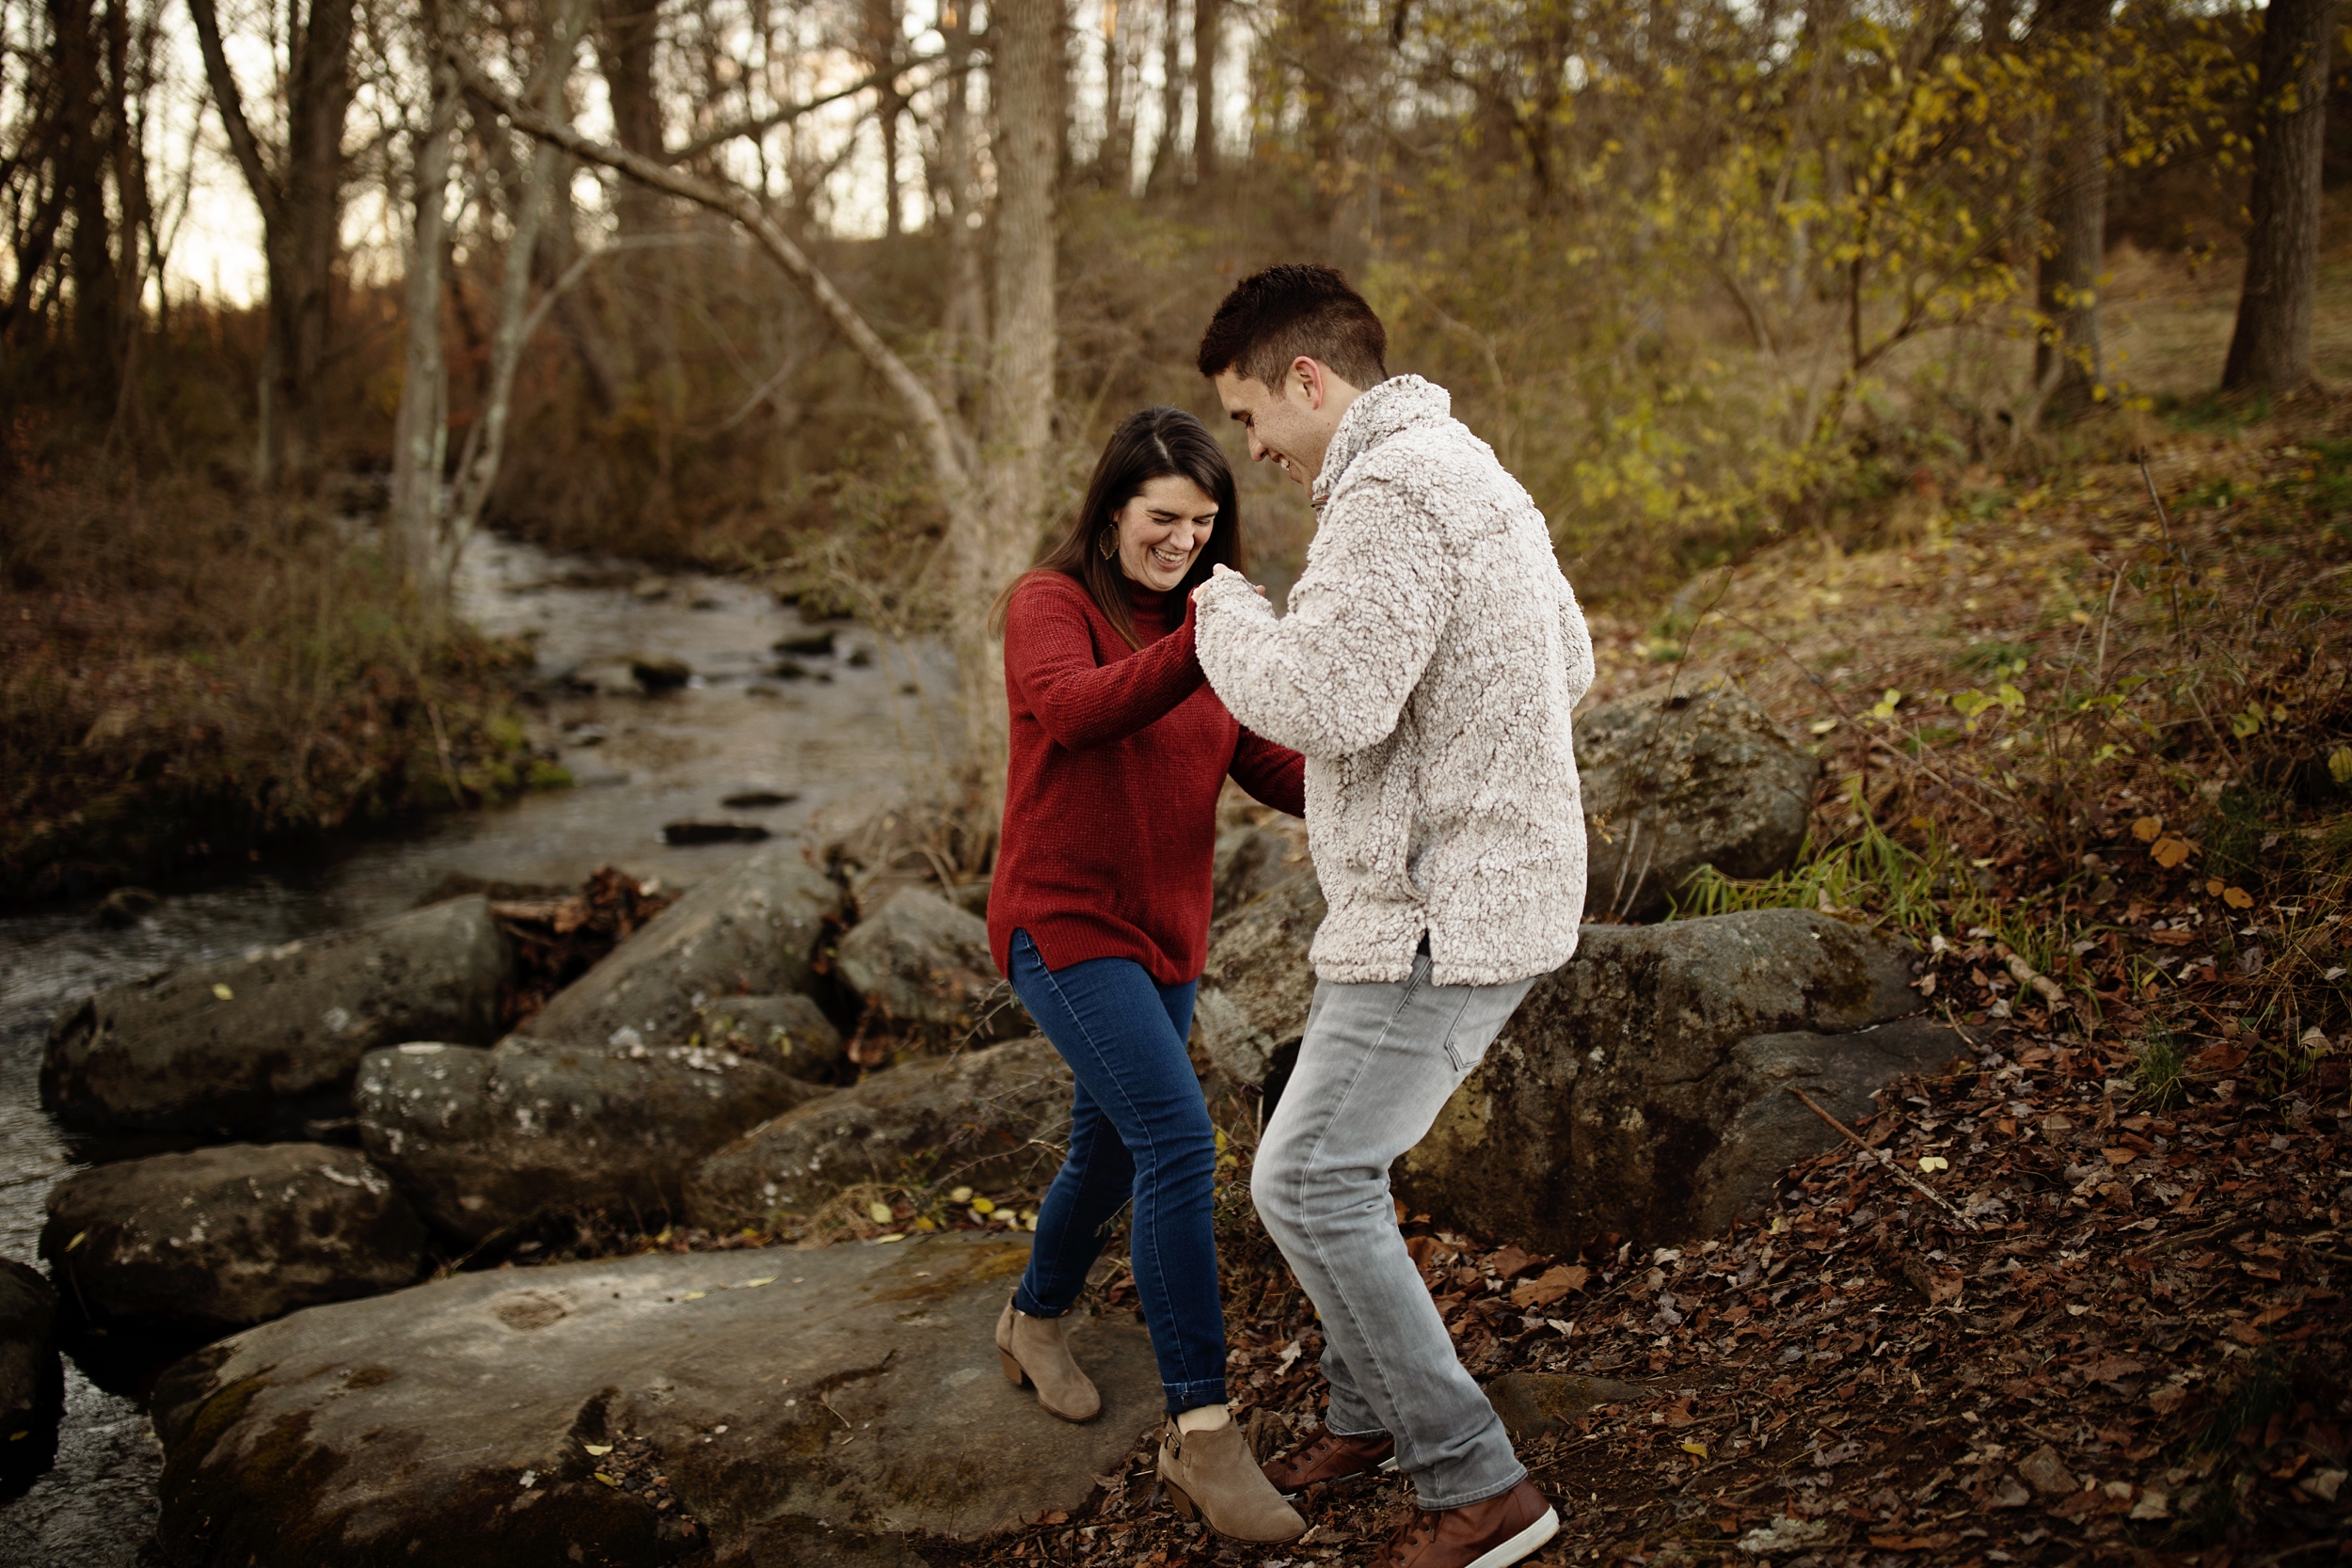 Wilmington Delaware Engagement Photographers in late fall at golden hour taken by Janae Rose Photography, East Coast Based Destination Wedding Photographers